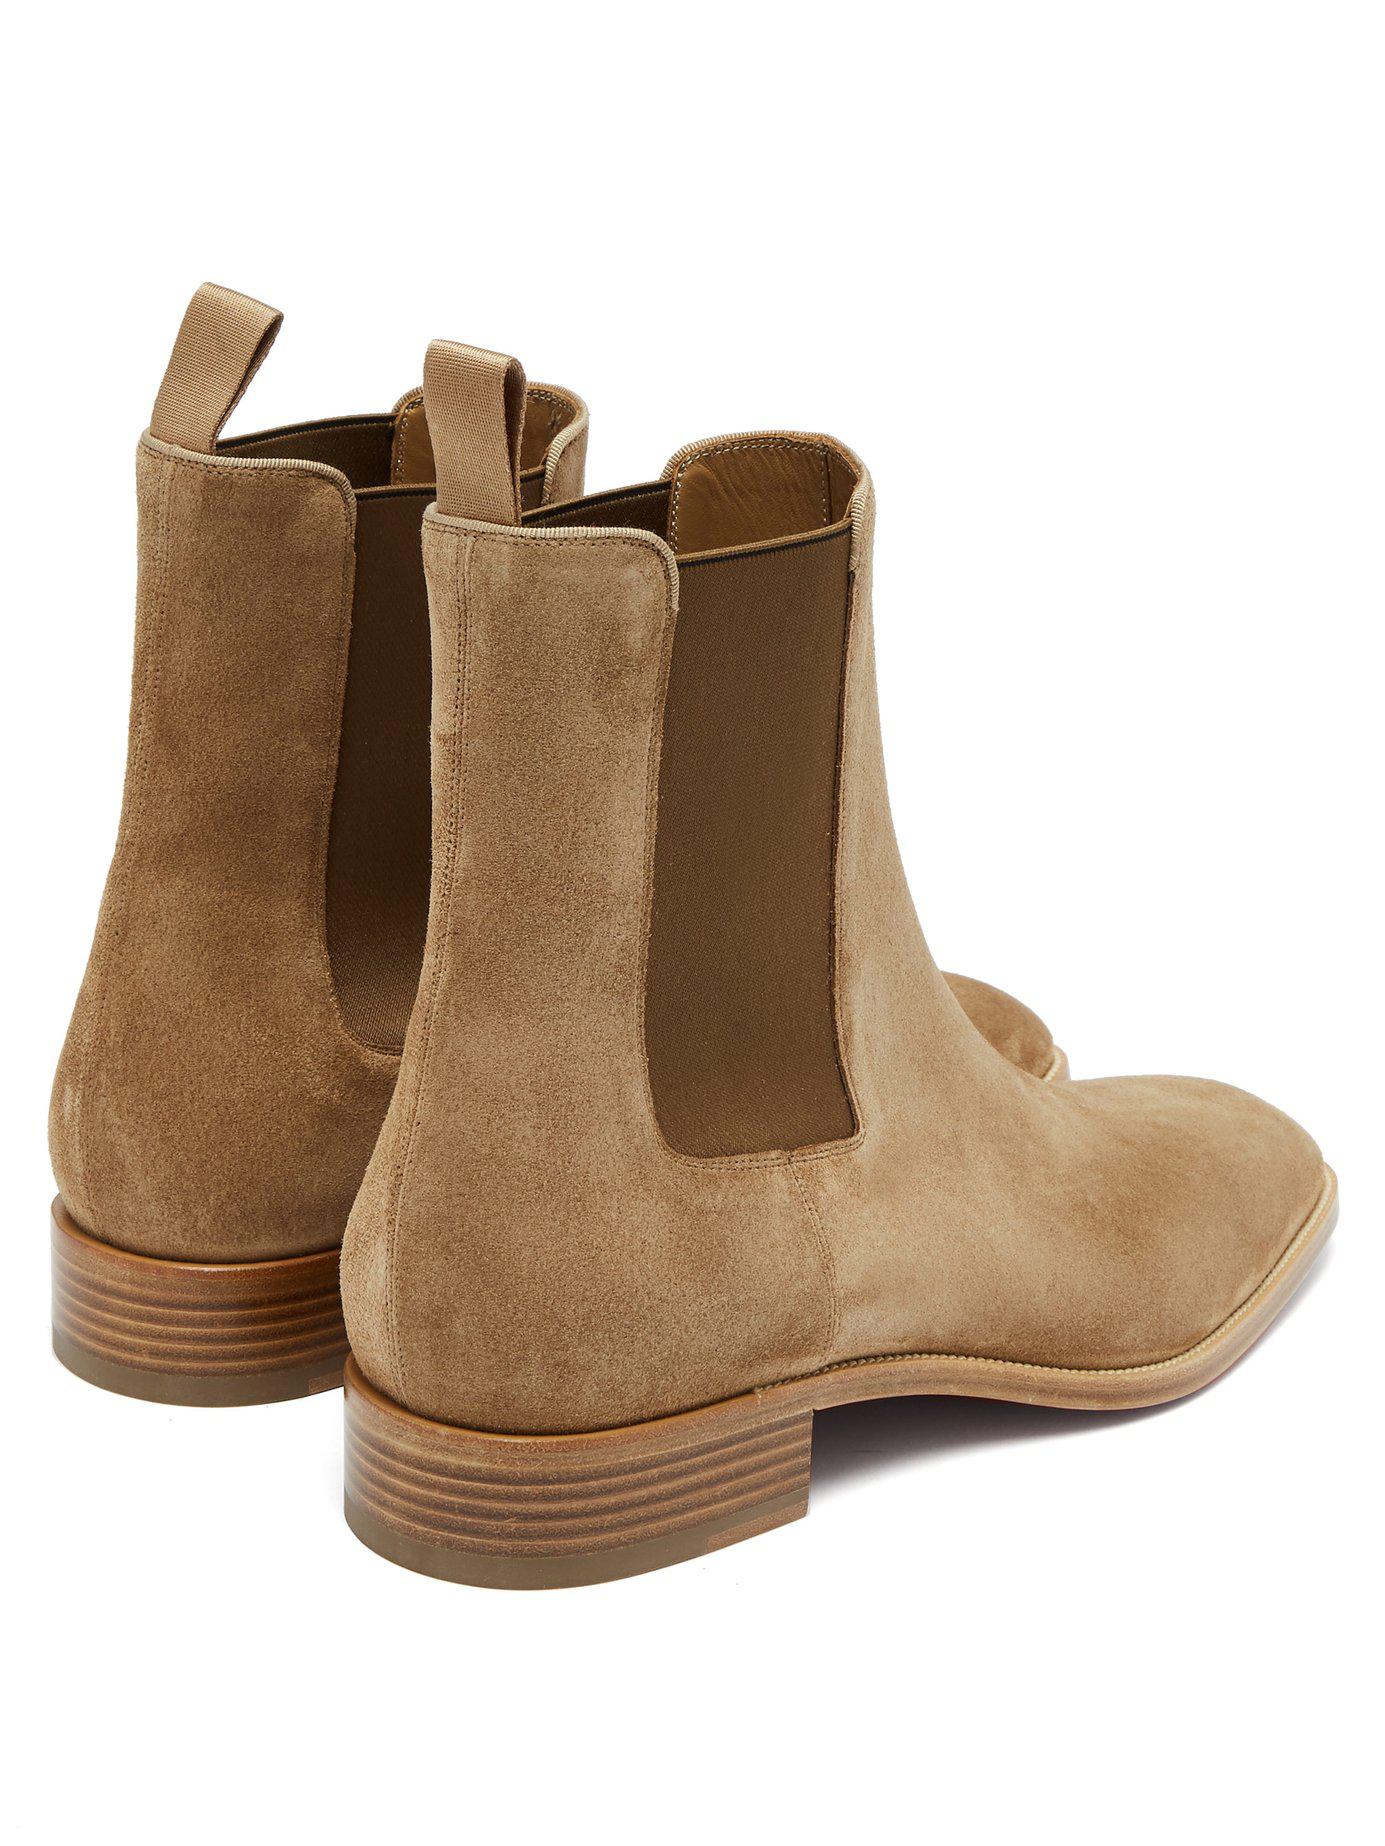 Christian Louboutin Samson Suede Chelsea Boots in Beige (Natural 